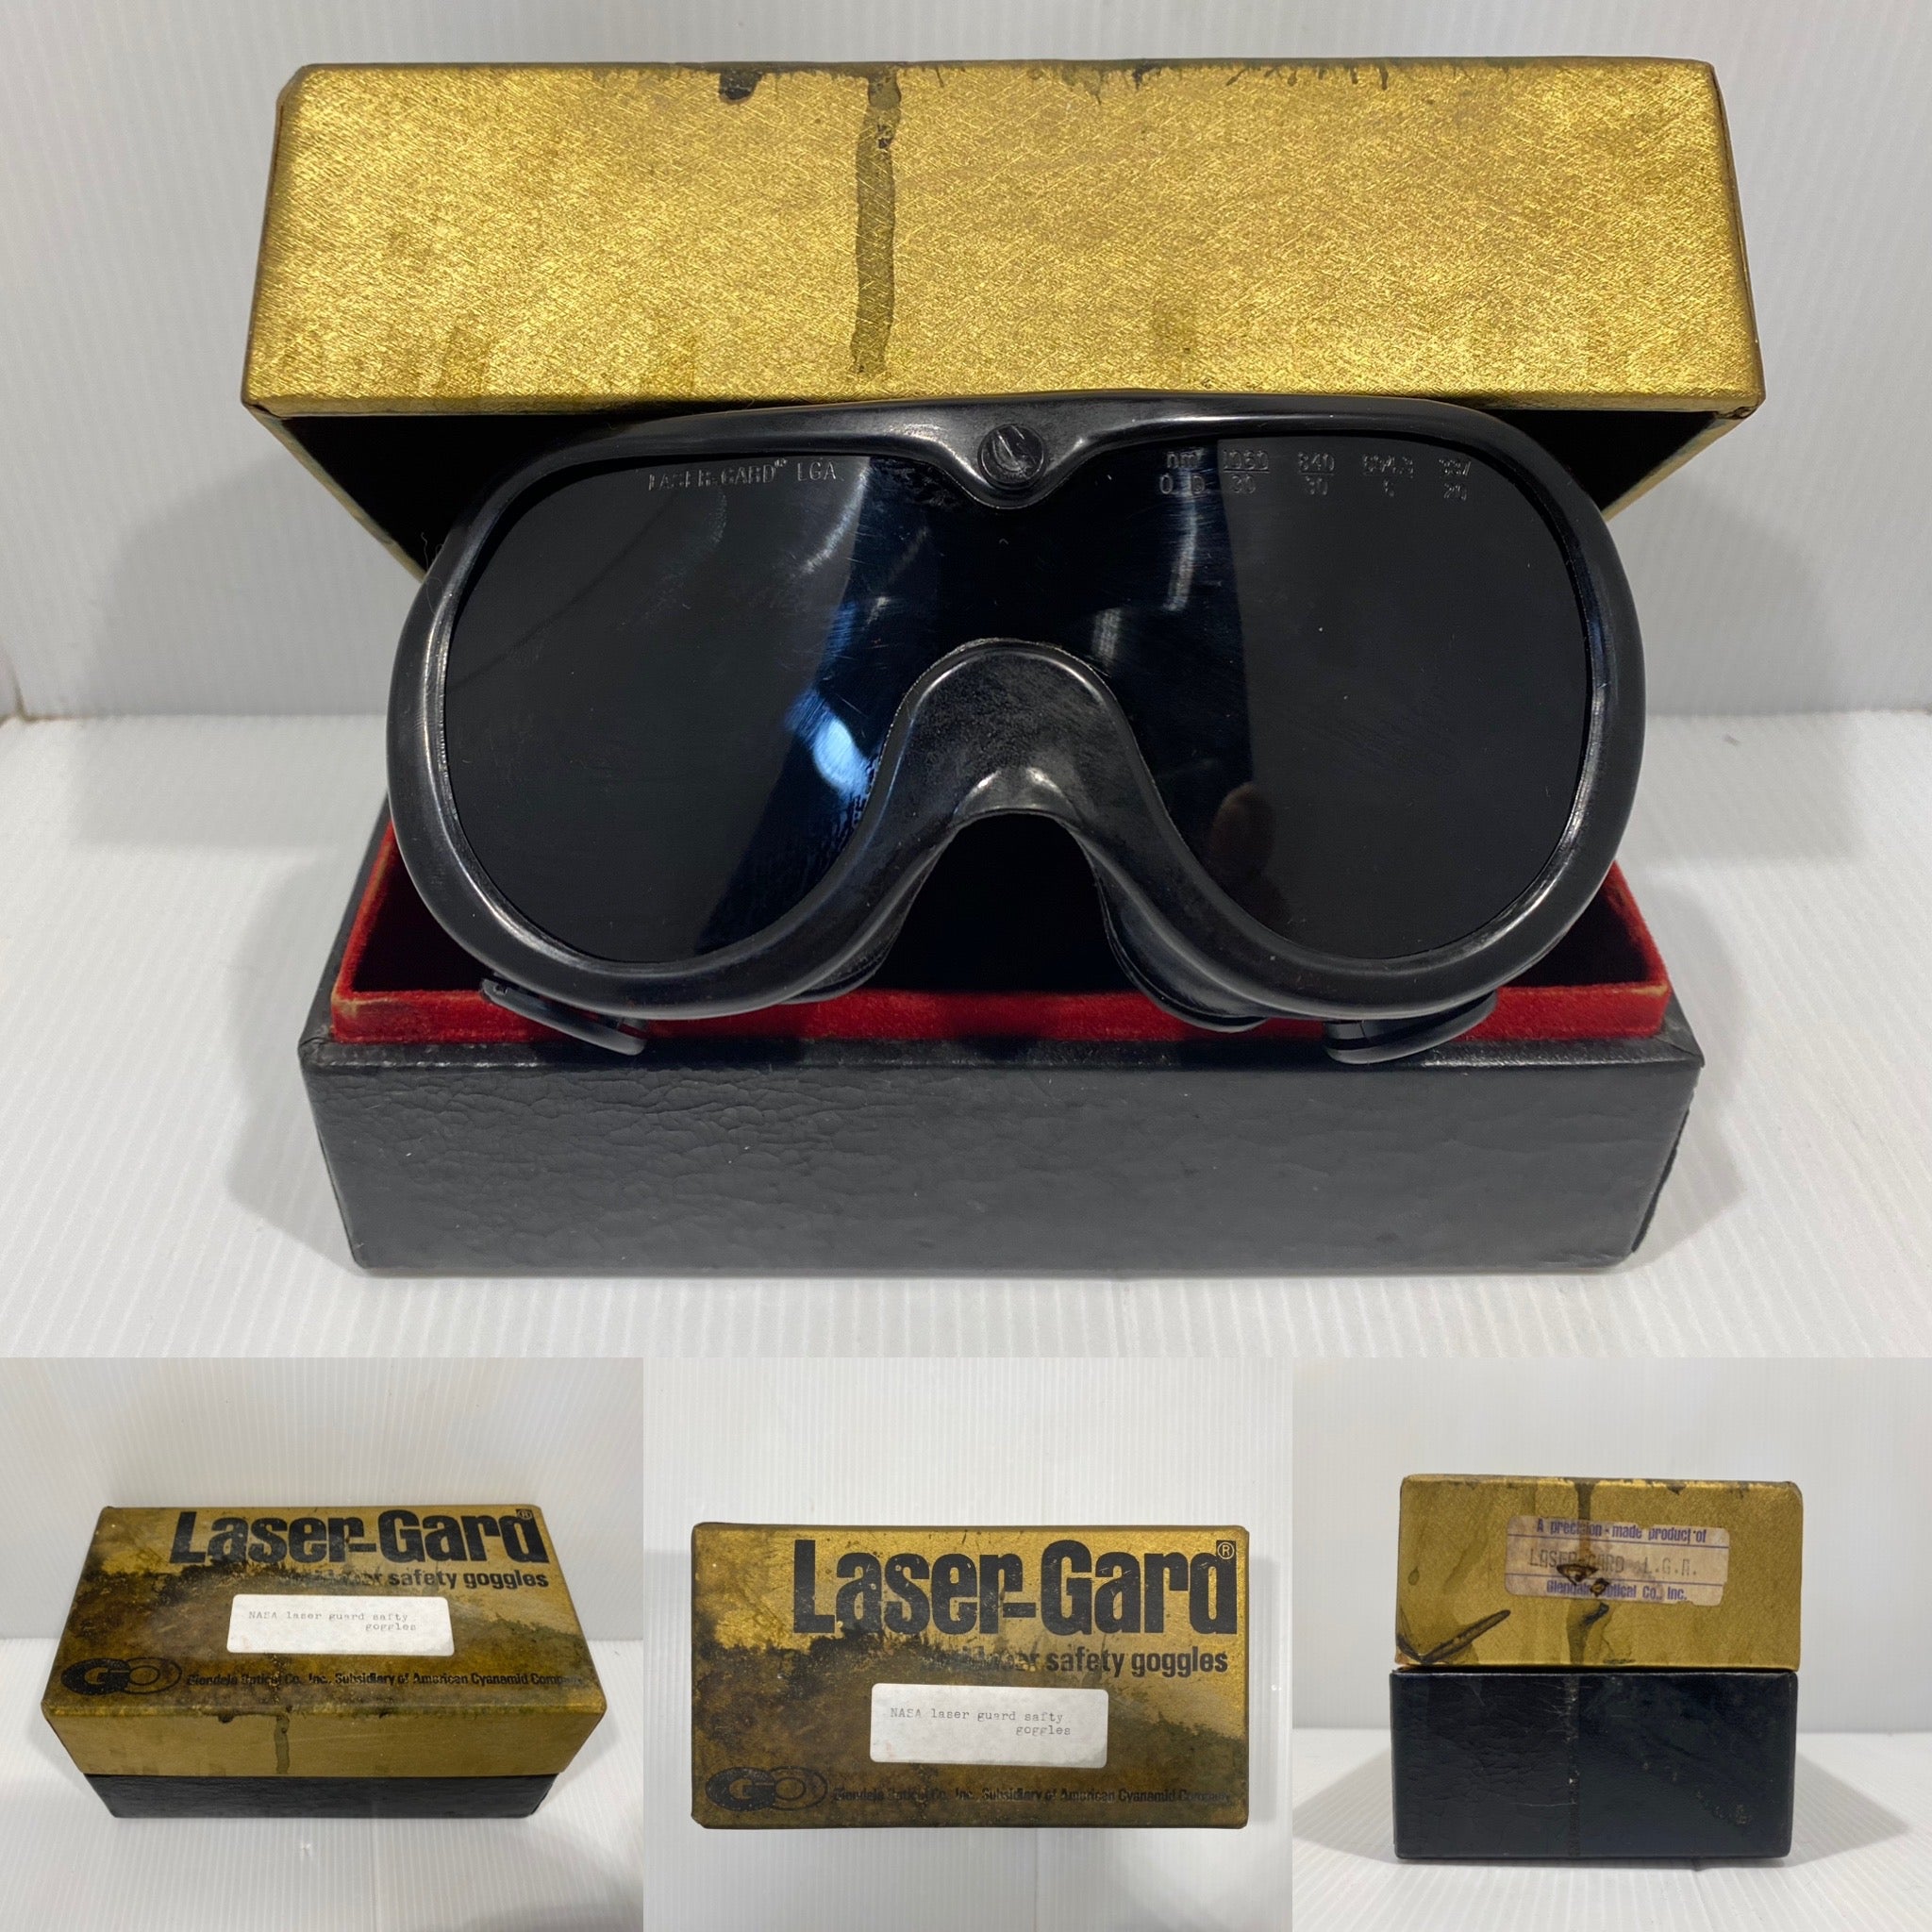 NASA Laser-Gard Safety Goggles. In the original box, Glendale Optical Co. Unused condition. Made in USA 1990s